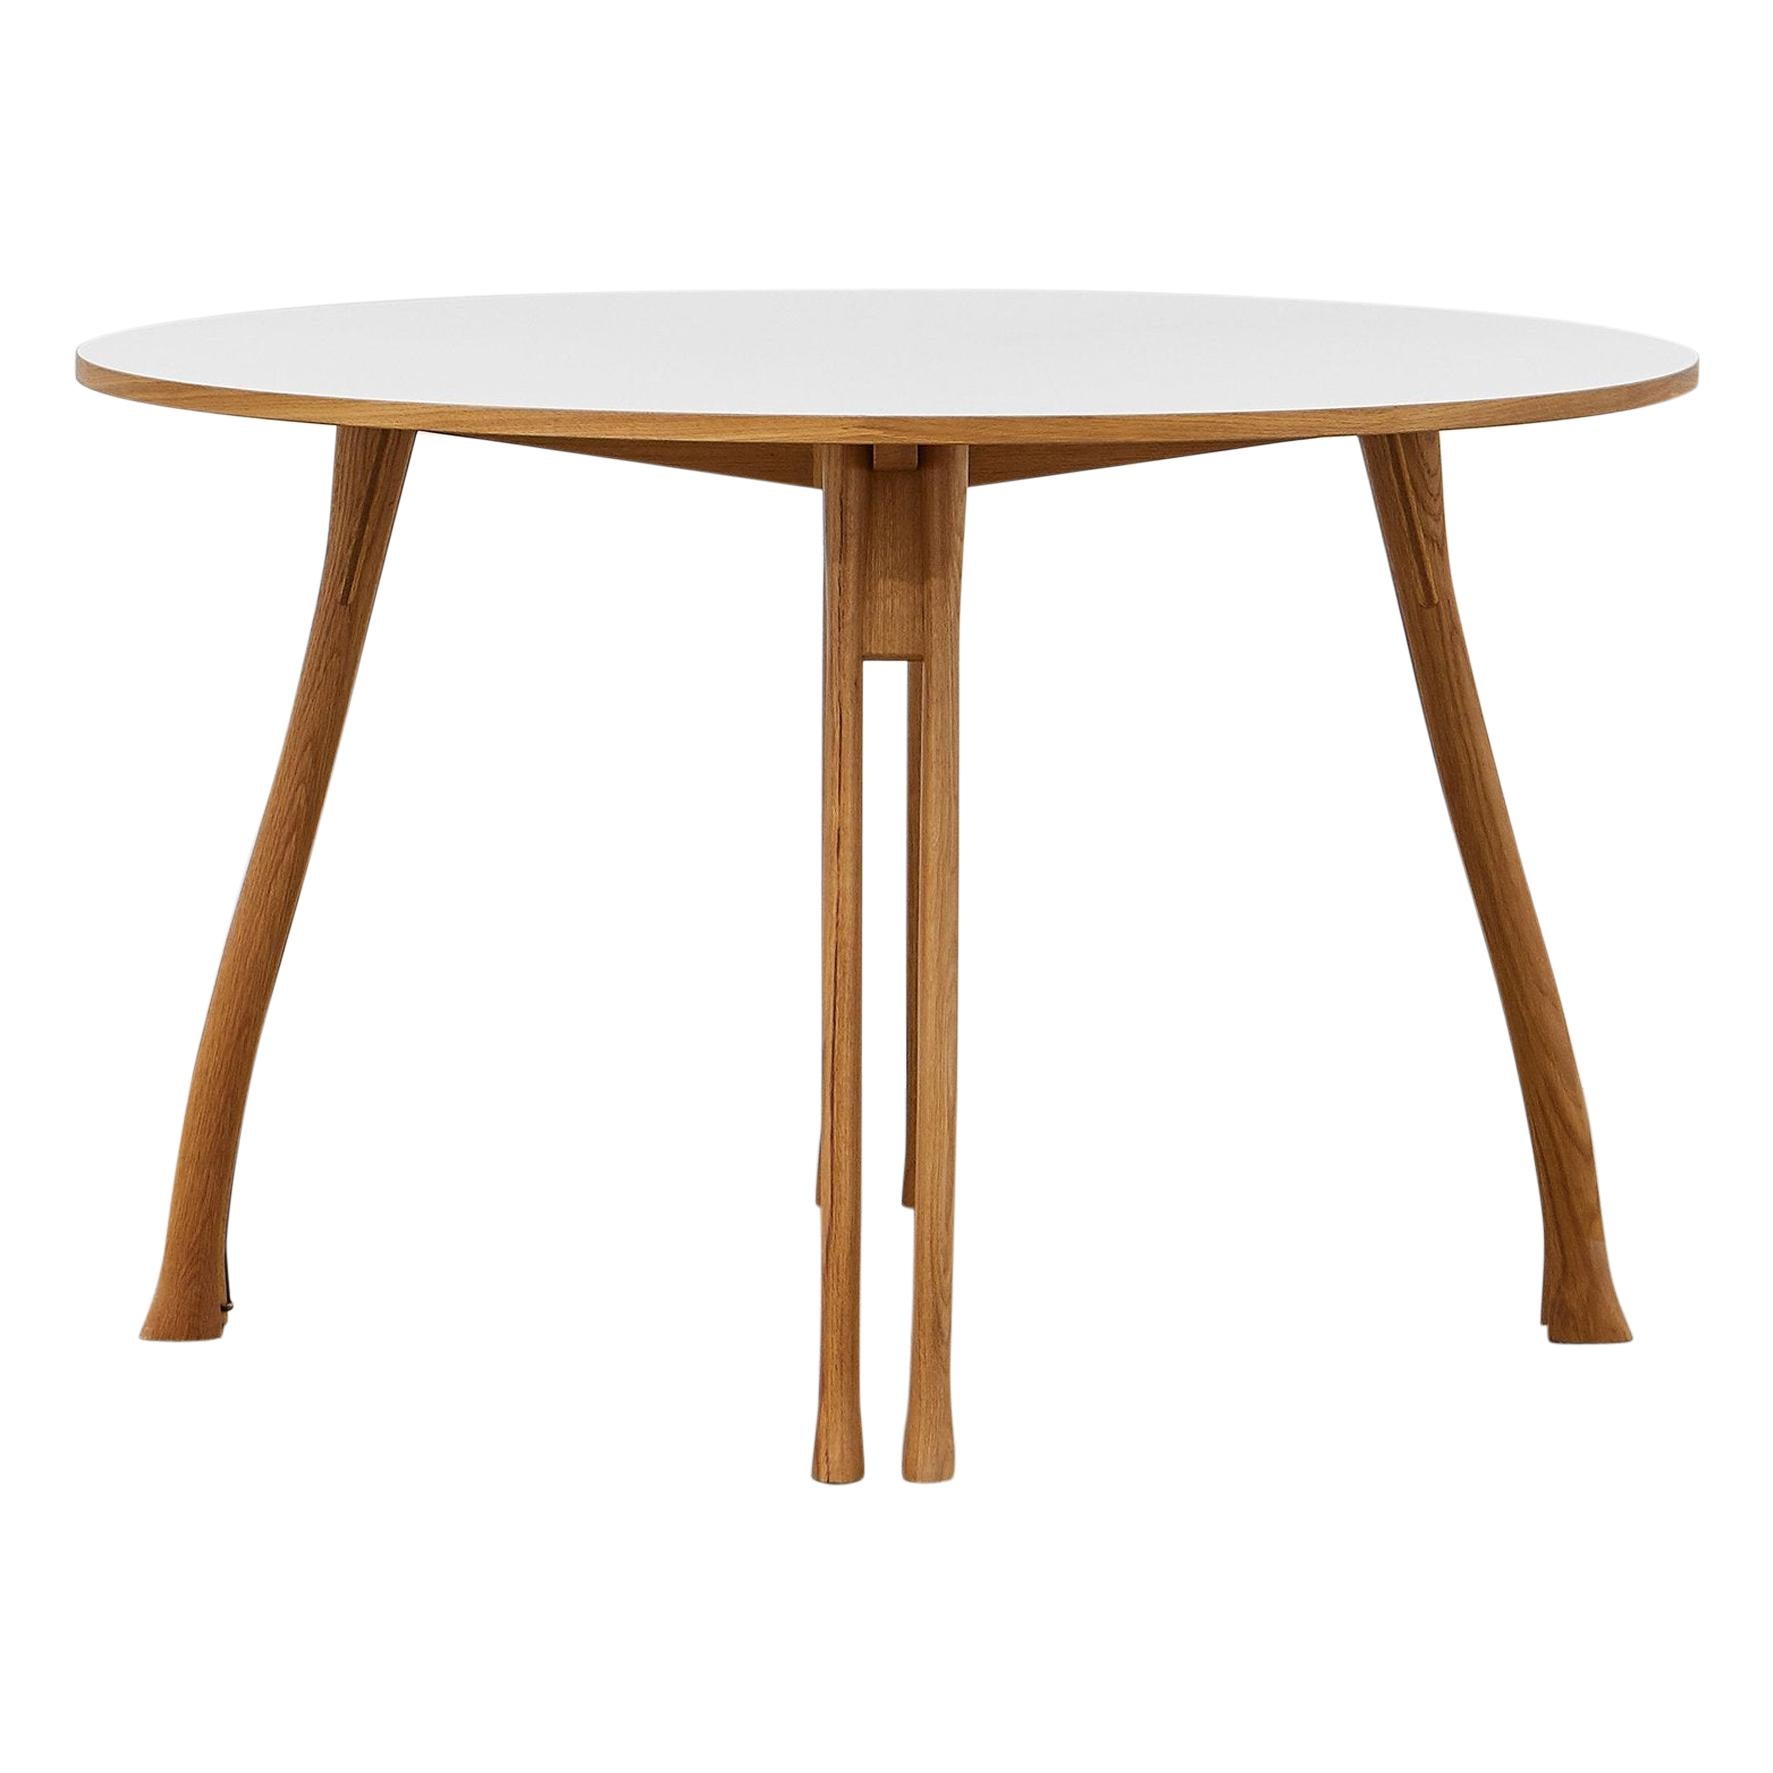 PH Axe Table, natural oak legs, laminated plate, without lamp